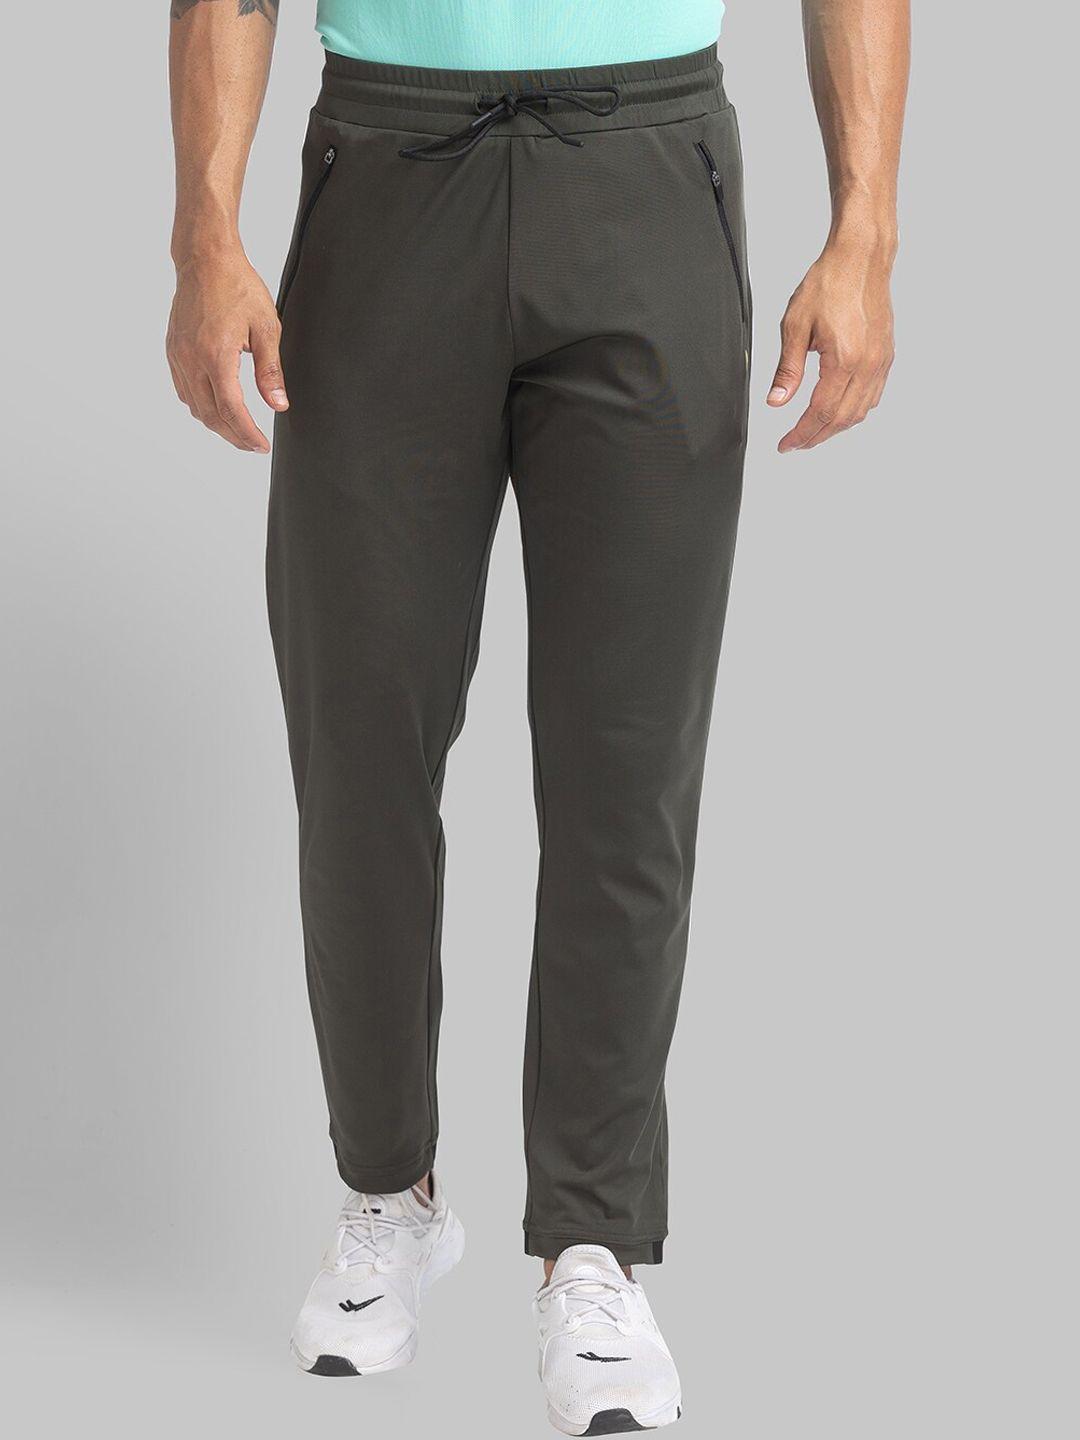 parx men relaxed fit mid-rise dry fit jogger